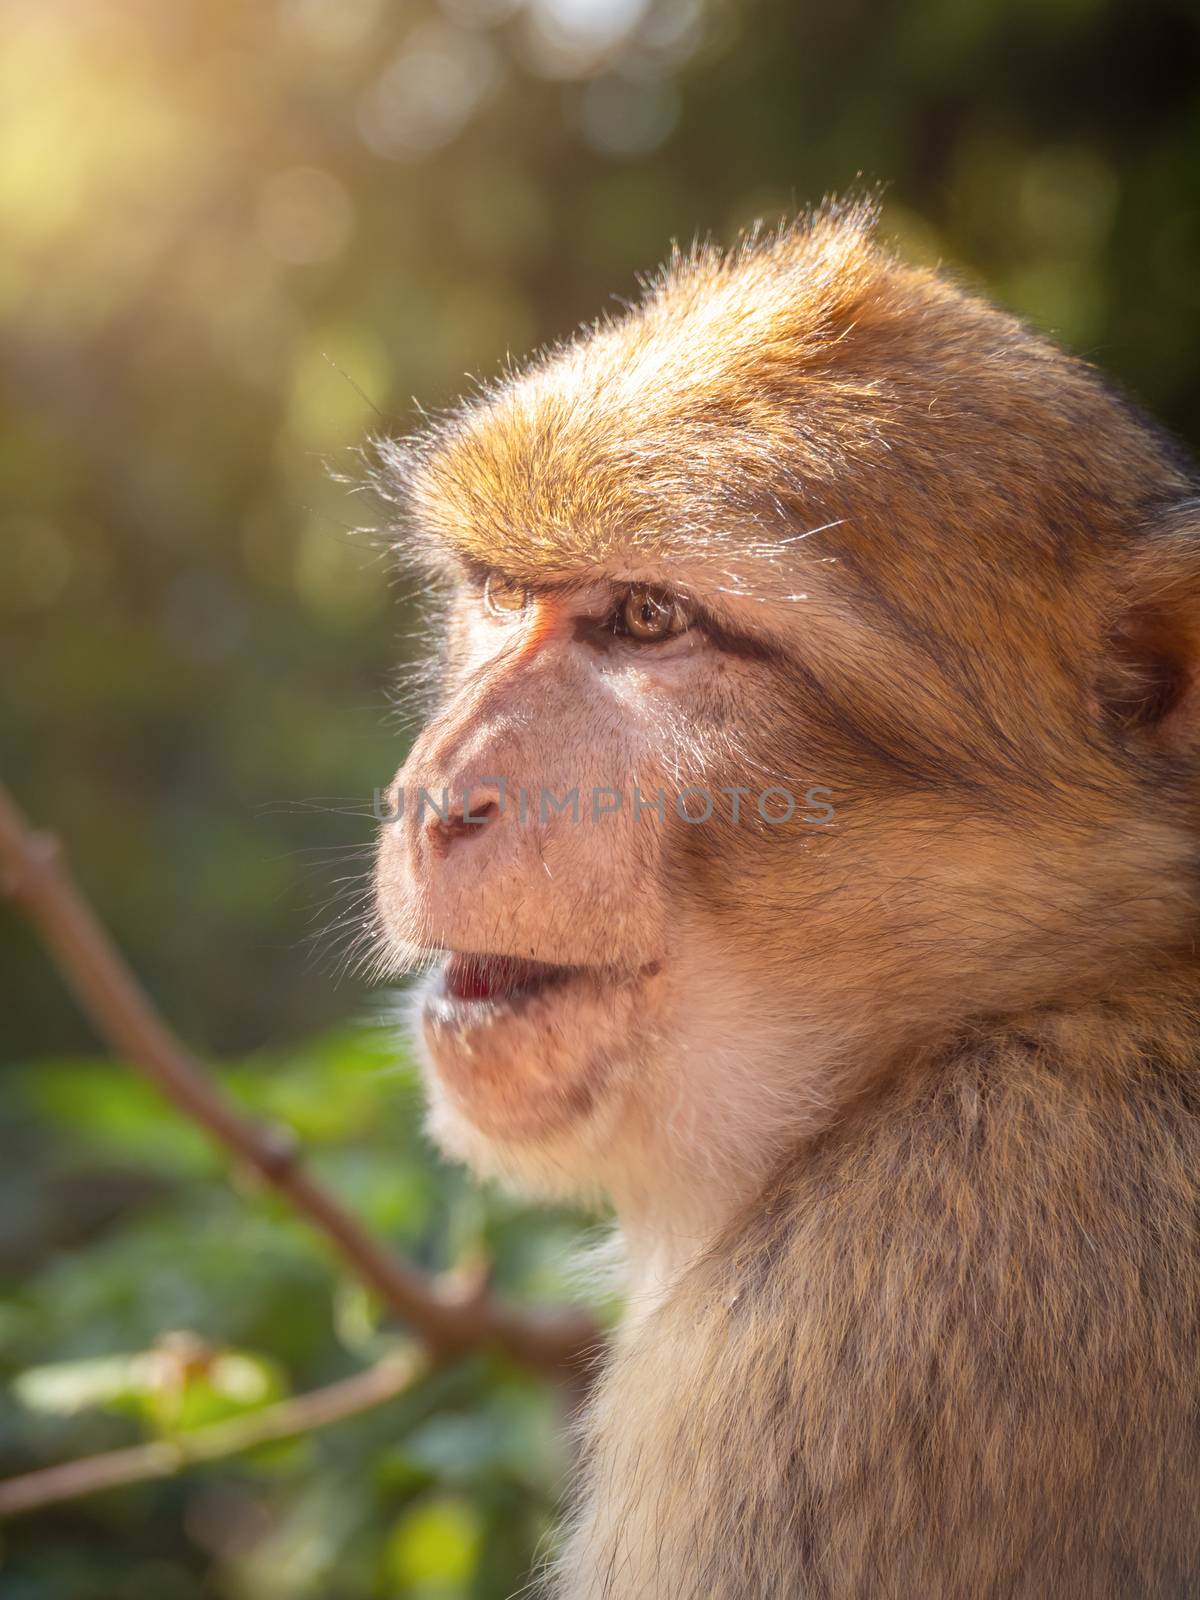 Barbary macaque in the forest by magann